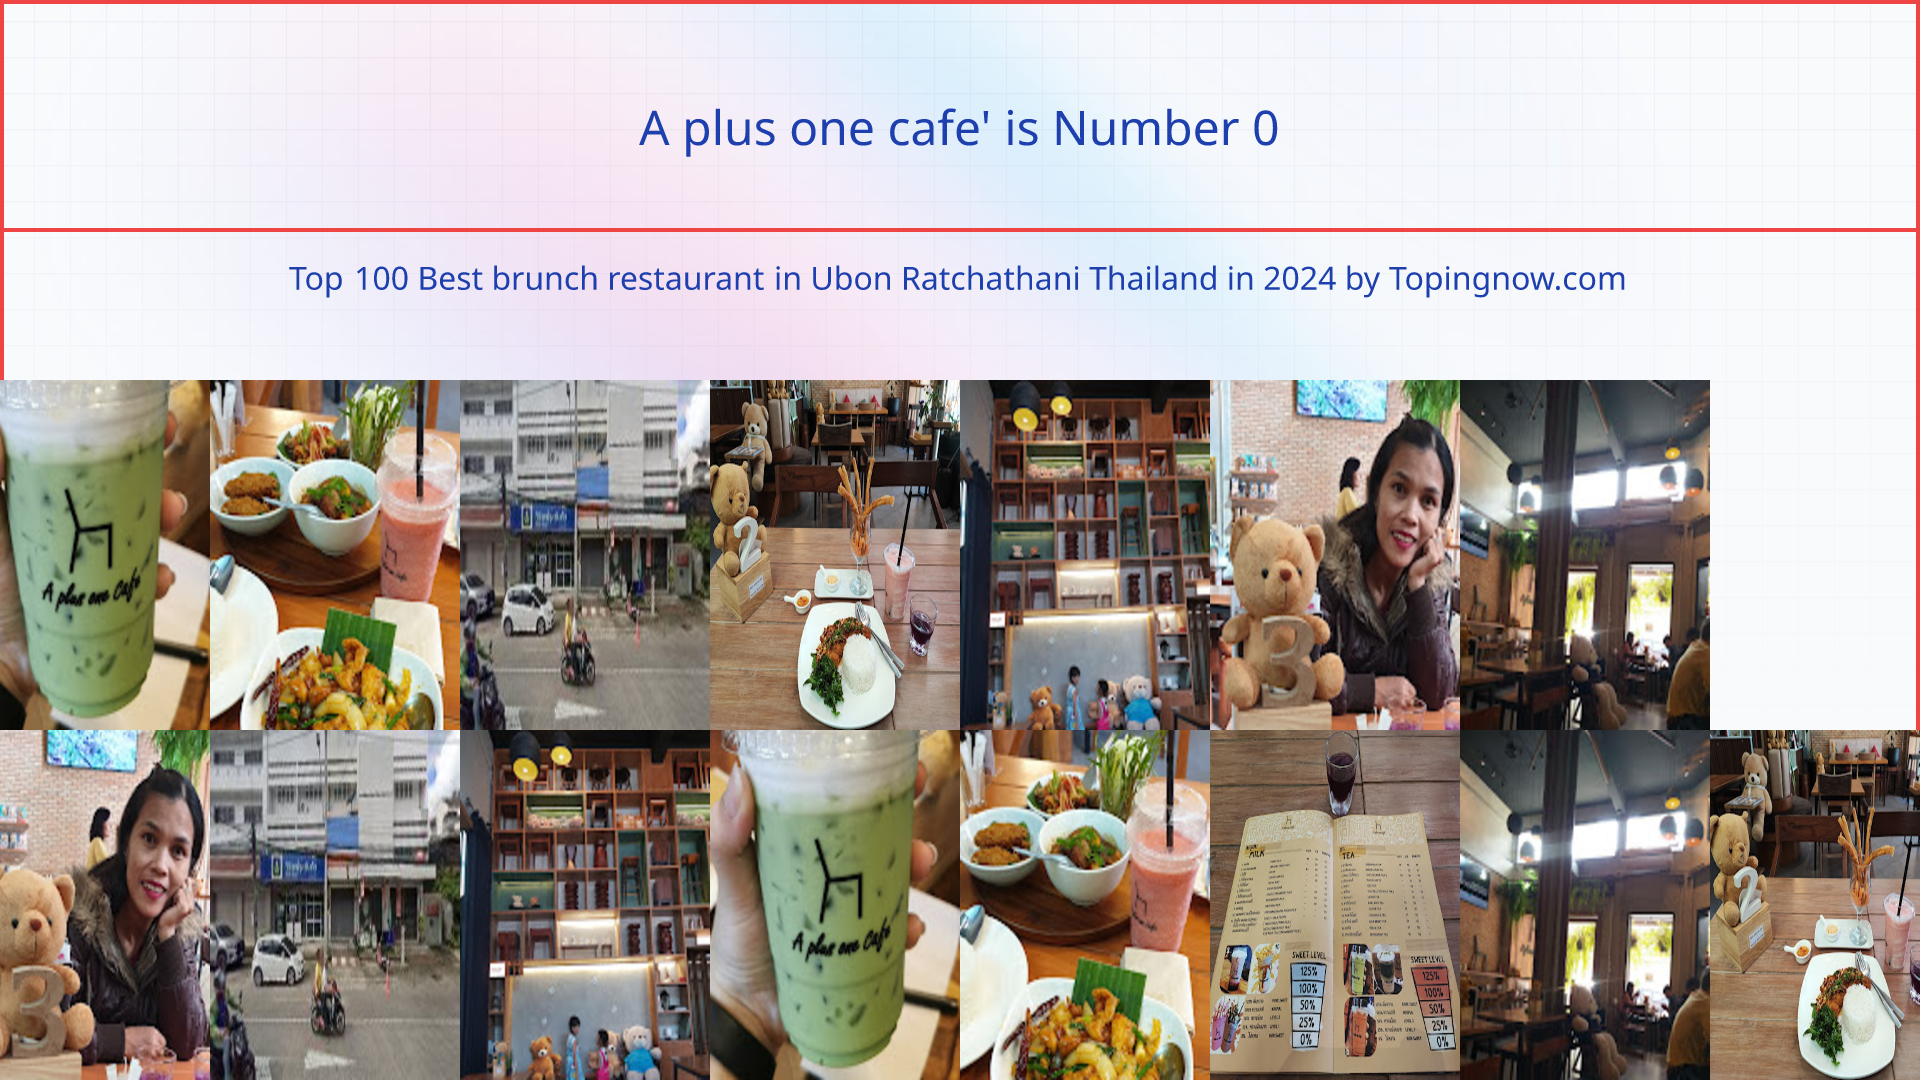 A plus one cafe': Top 100 Best brunch restaurant in Ubon Ratchathani Thailand in 2024